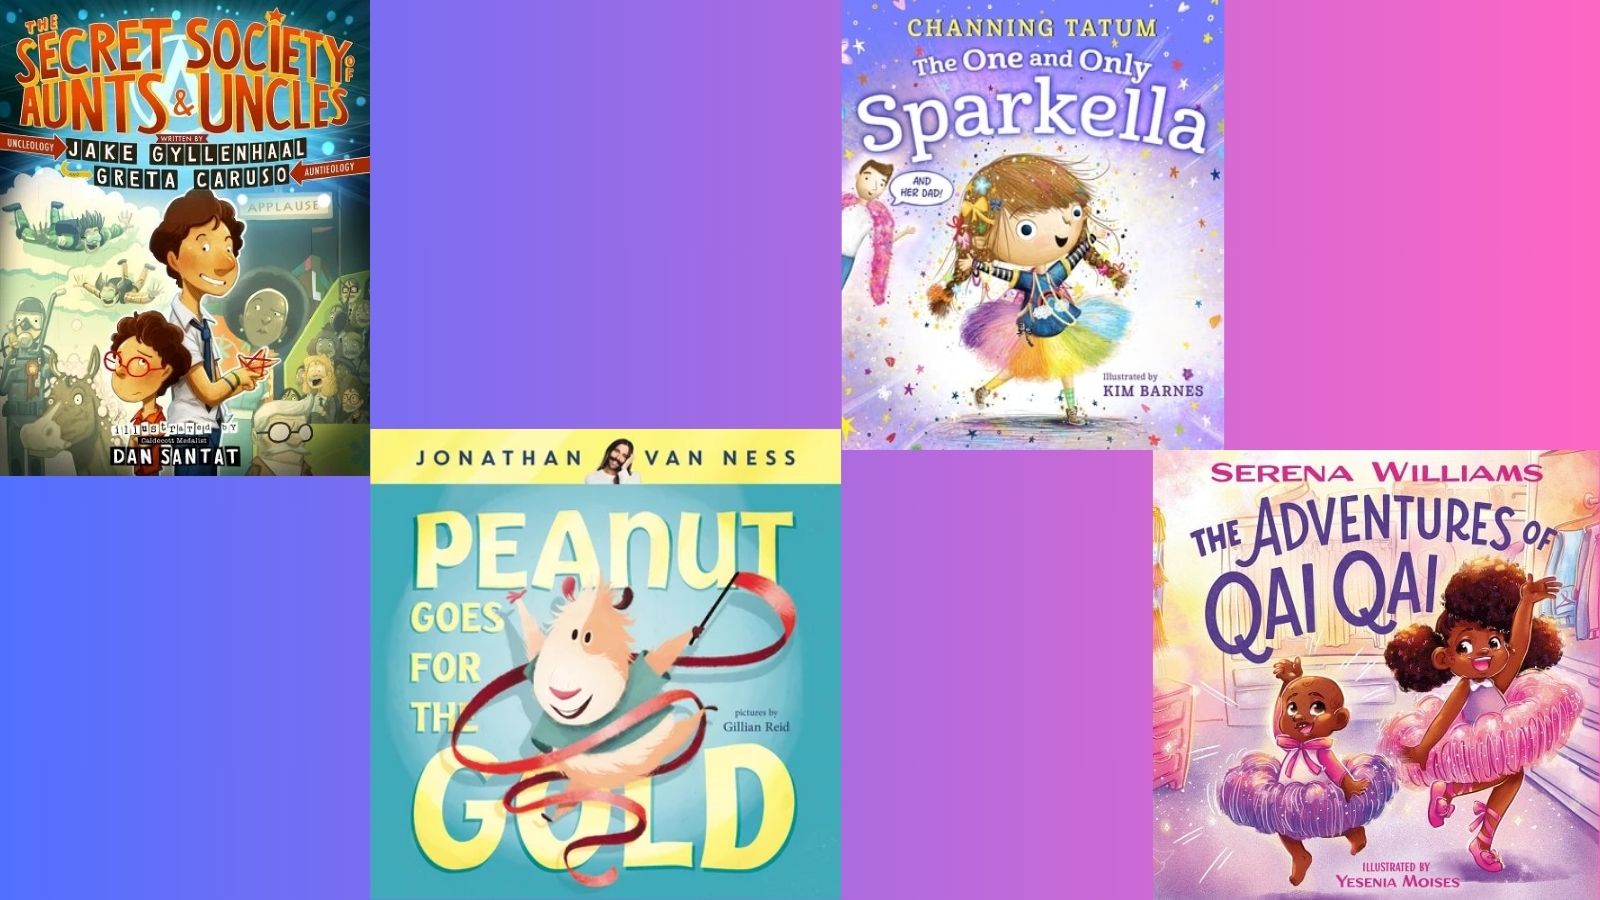 Book Covers of "The Secret Society of Aunts and Uncles," "Peanut Goes for the Gold," "The One and Only Sparkella," and "The Adventures of Qai Qai"